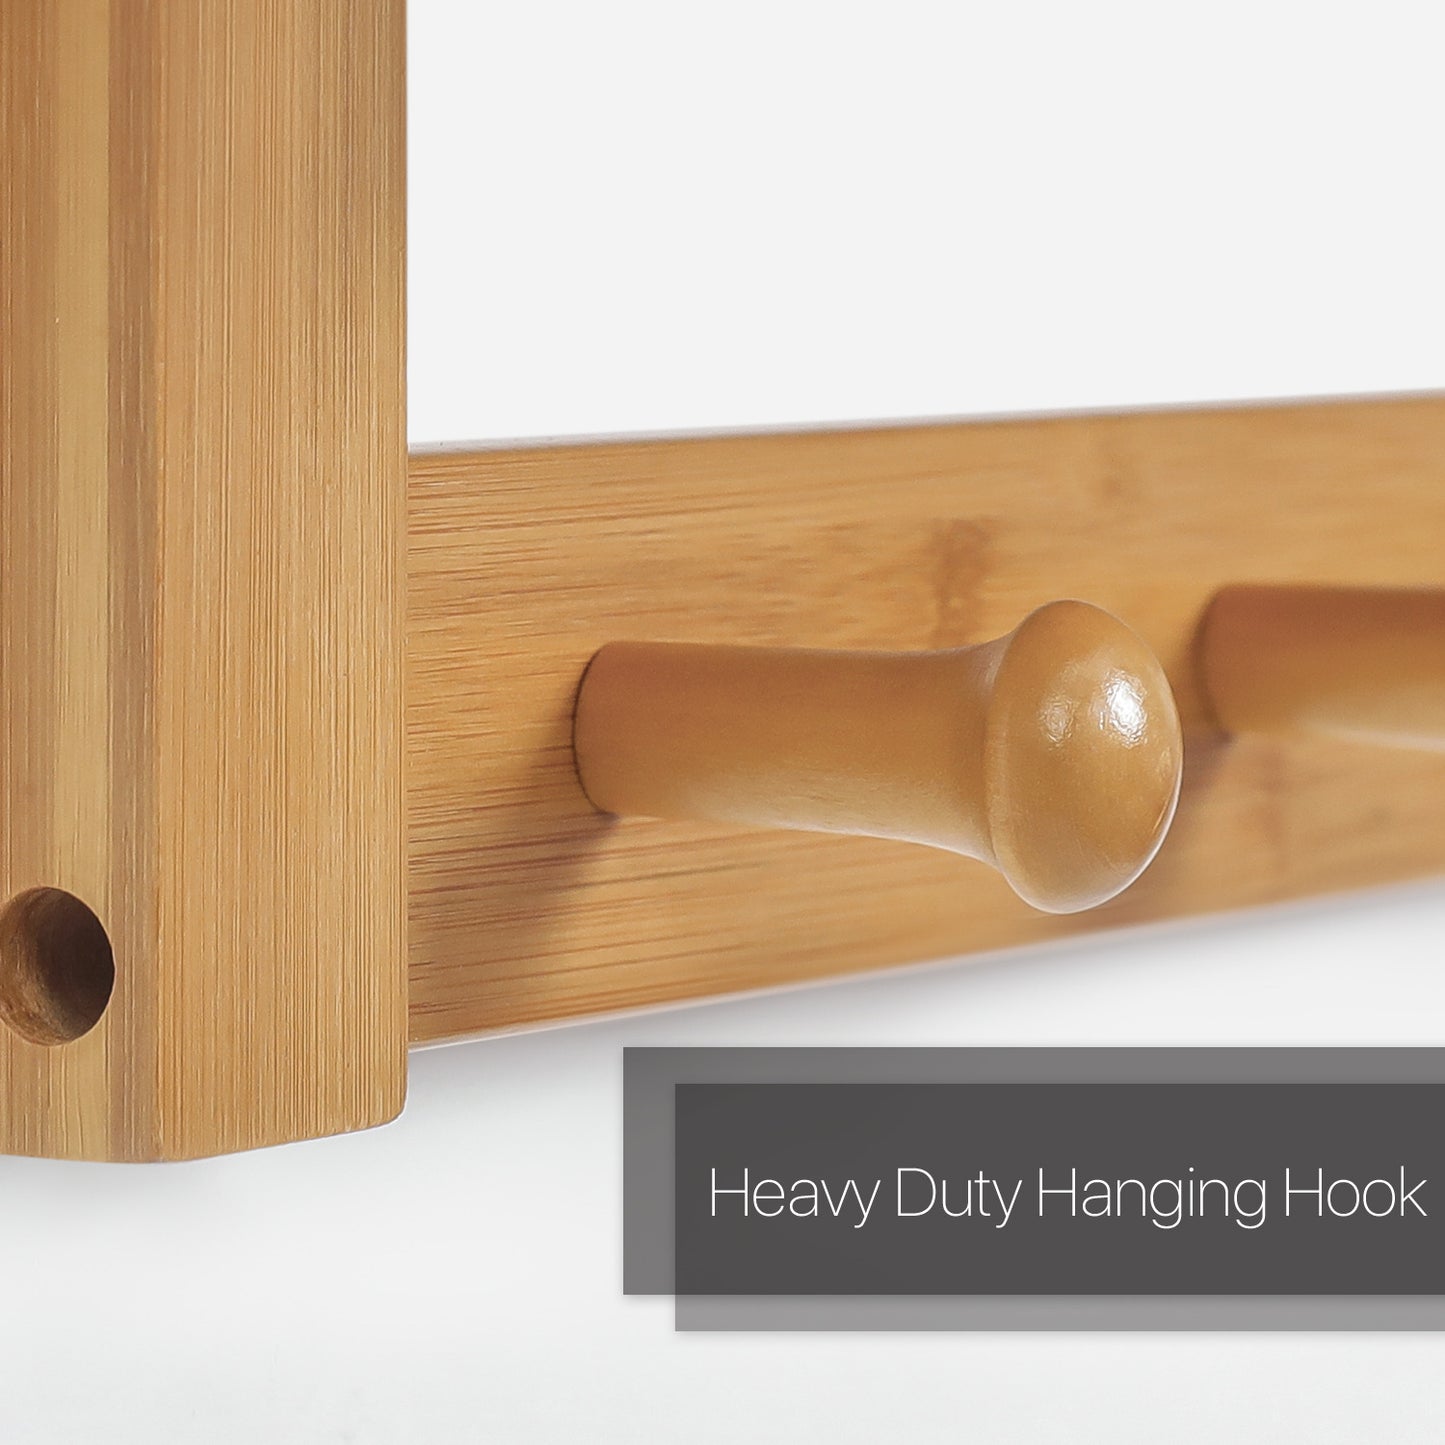 Wall Mounted Coat Hook - with Shelf - Natural